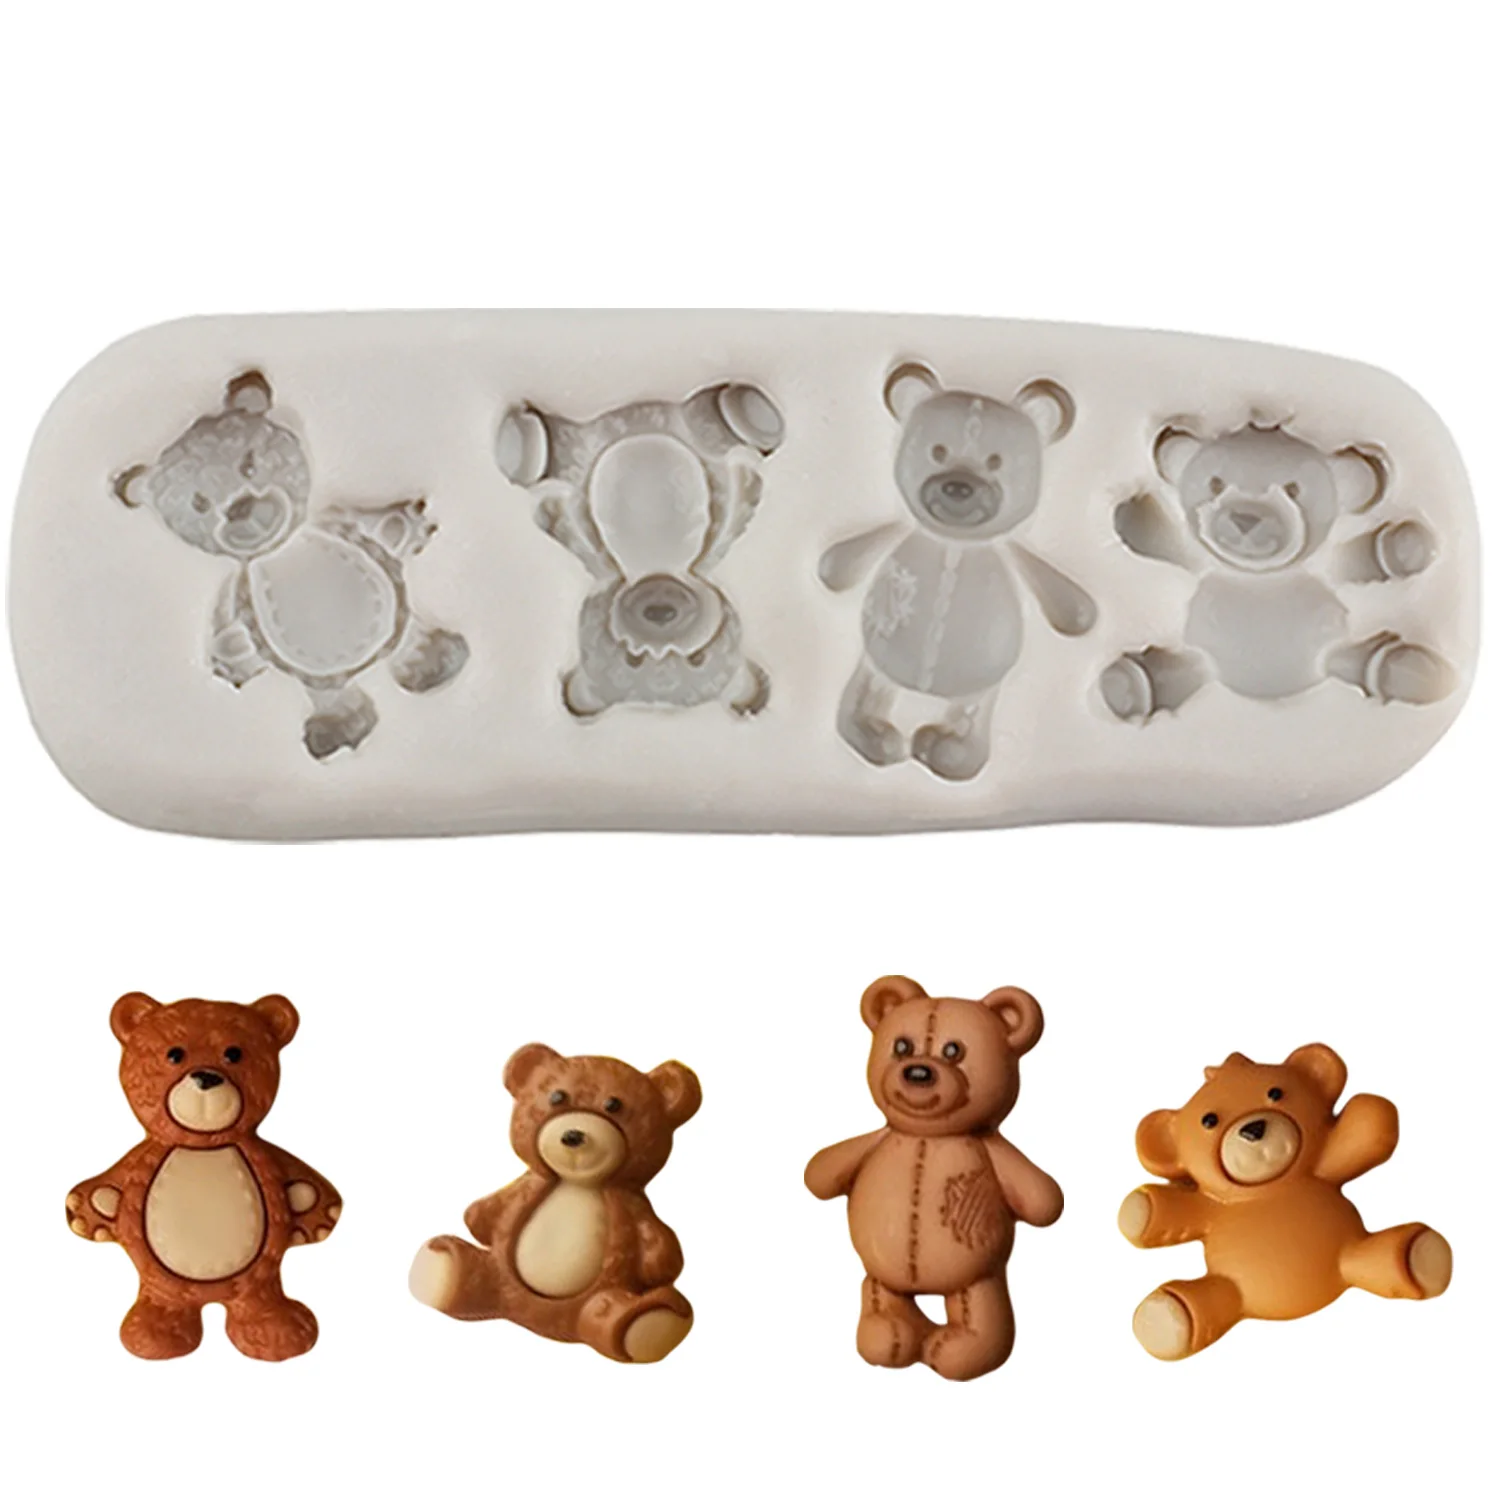 

3D Cute Bear Silicone Mold Baby Party Chocolate Fondant Molds Cake Decorating Tools Cupcake Topper Polymer Clay Candy Moulds